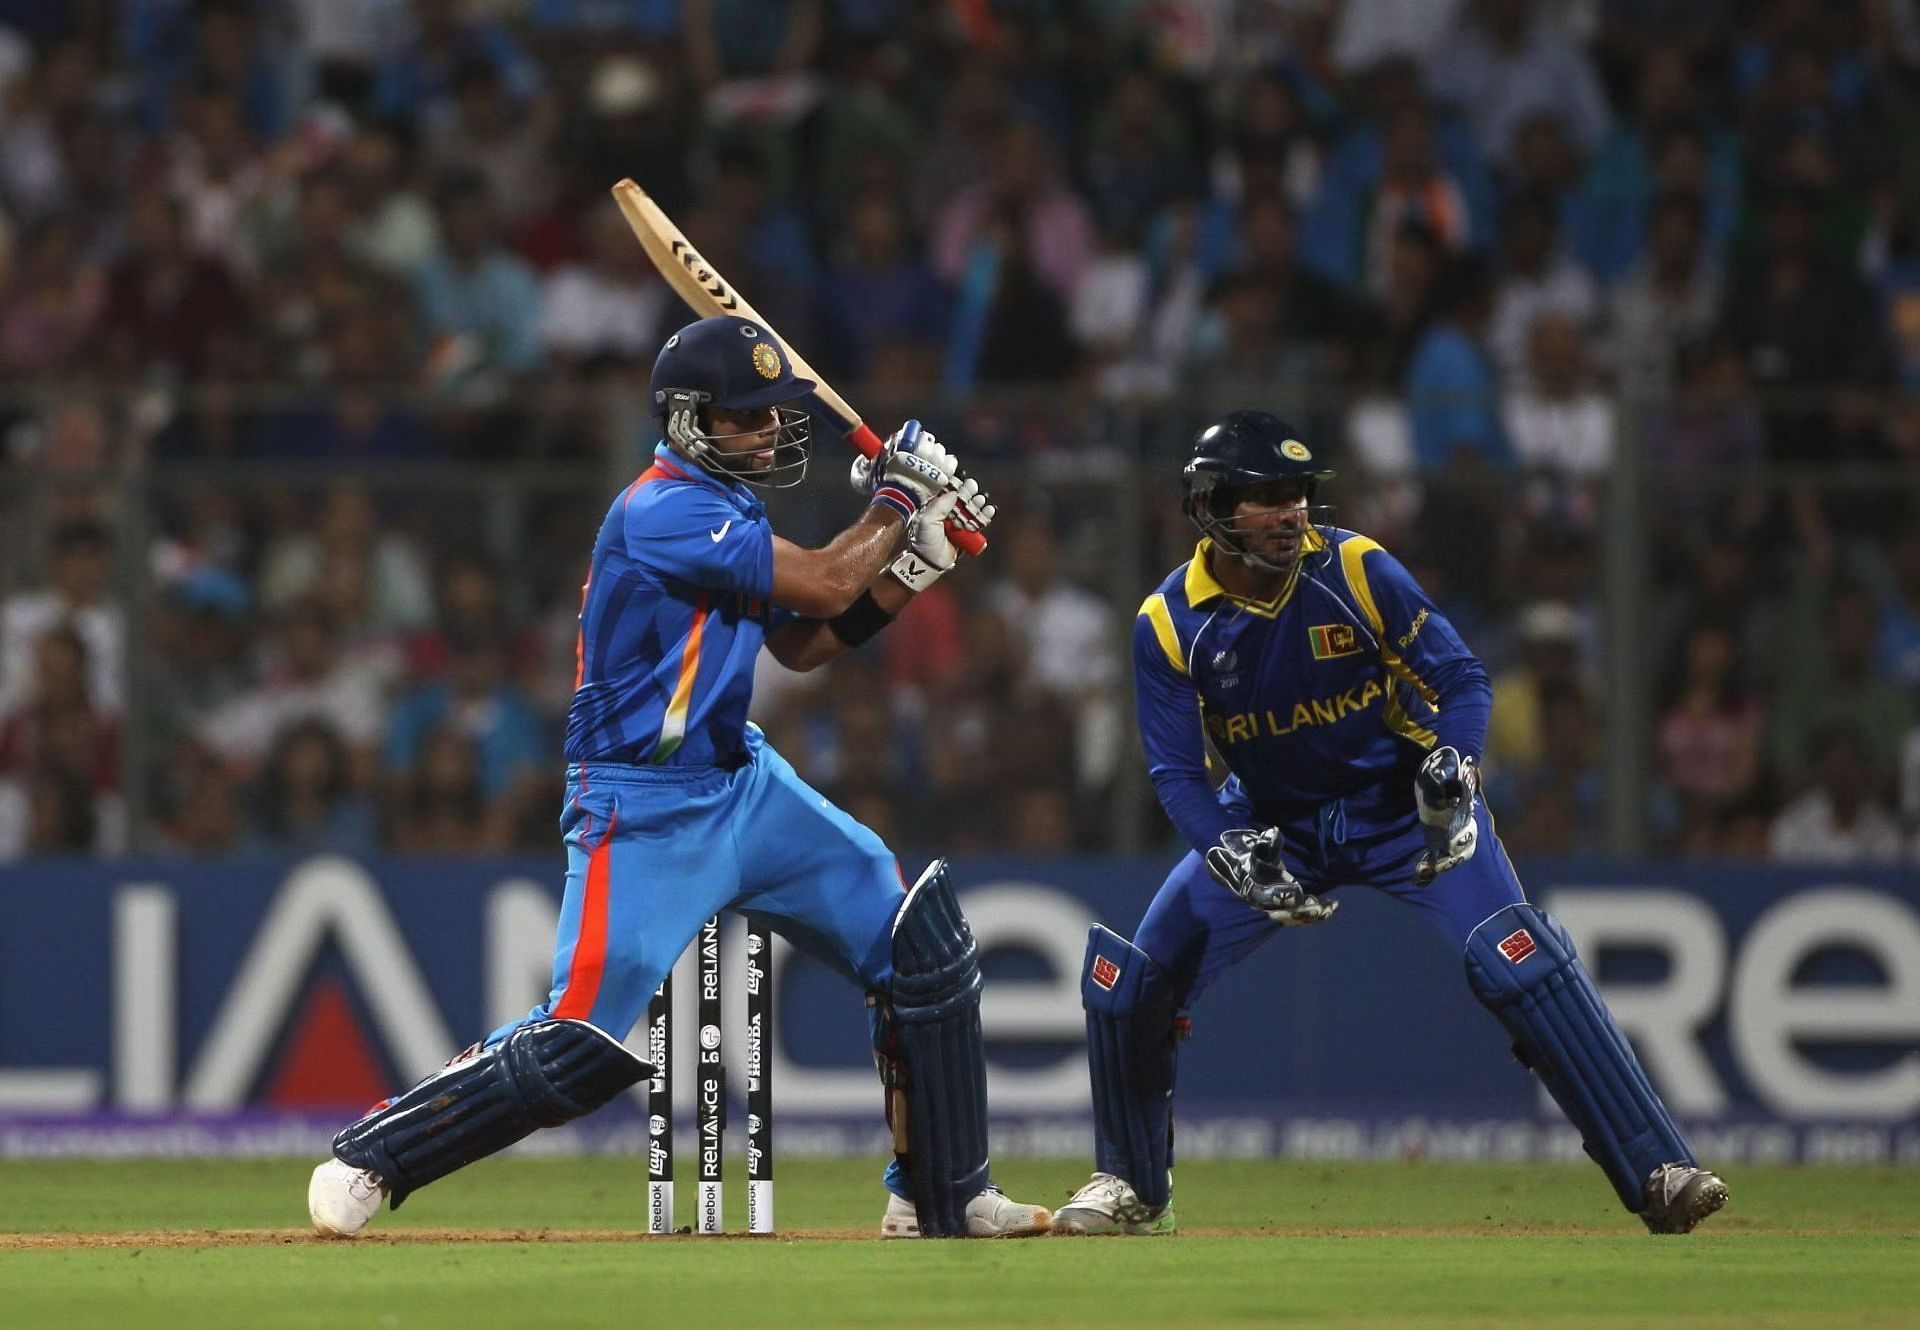 Kohli was relatively new to international cricket in 2011 but played a crucial cameo in the World Cup final against Sri Lanka. Chasing 275, India had lost Virender Sehwag and Sachin Tendulkar cheaply. Kohli (35) and Gambhir (97) added 83 for the third wicket to steady the innings. The rest is history. (Pic: Getty Images)